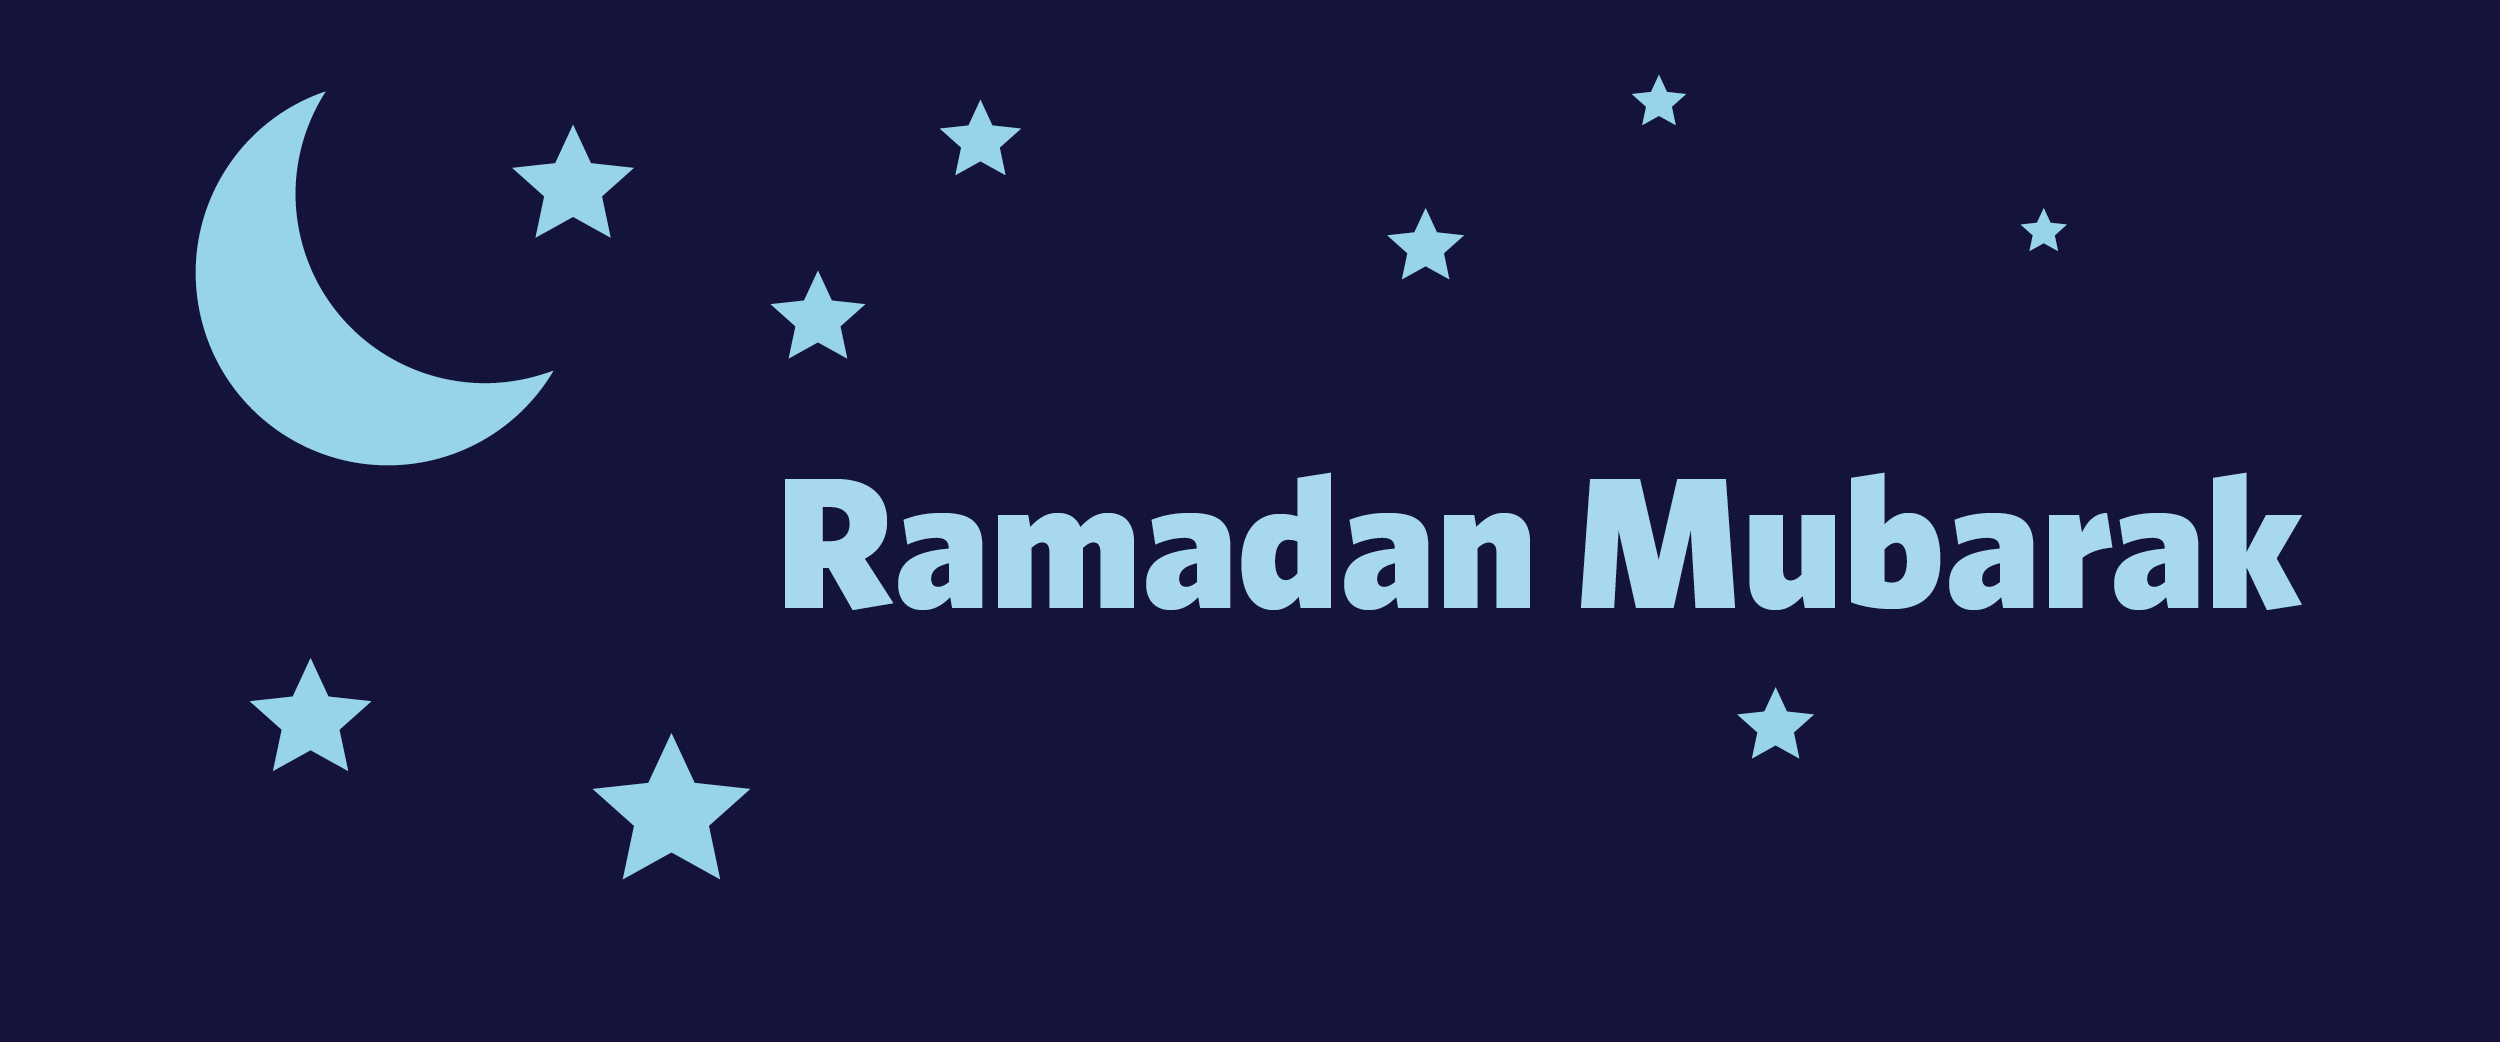 A Quick Guide to Ramadan - UBC Equity & Inclusion Office